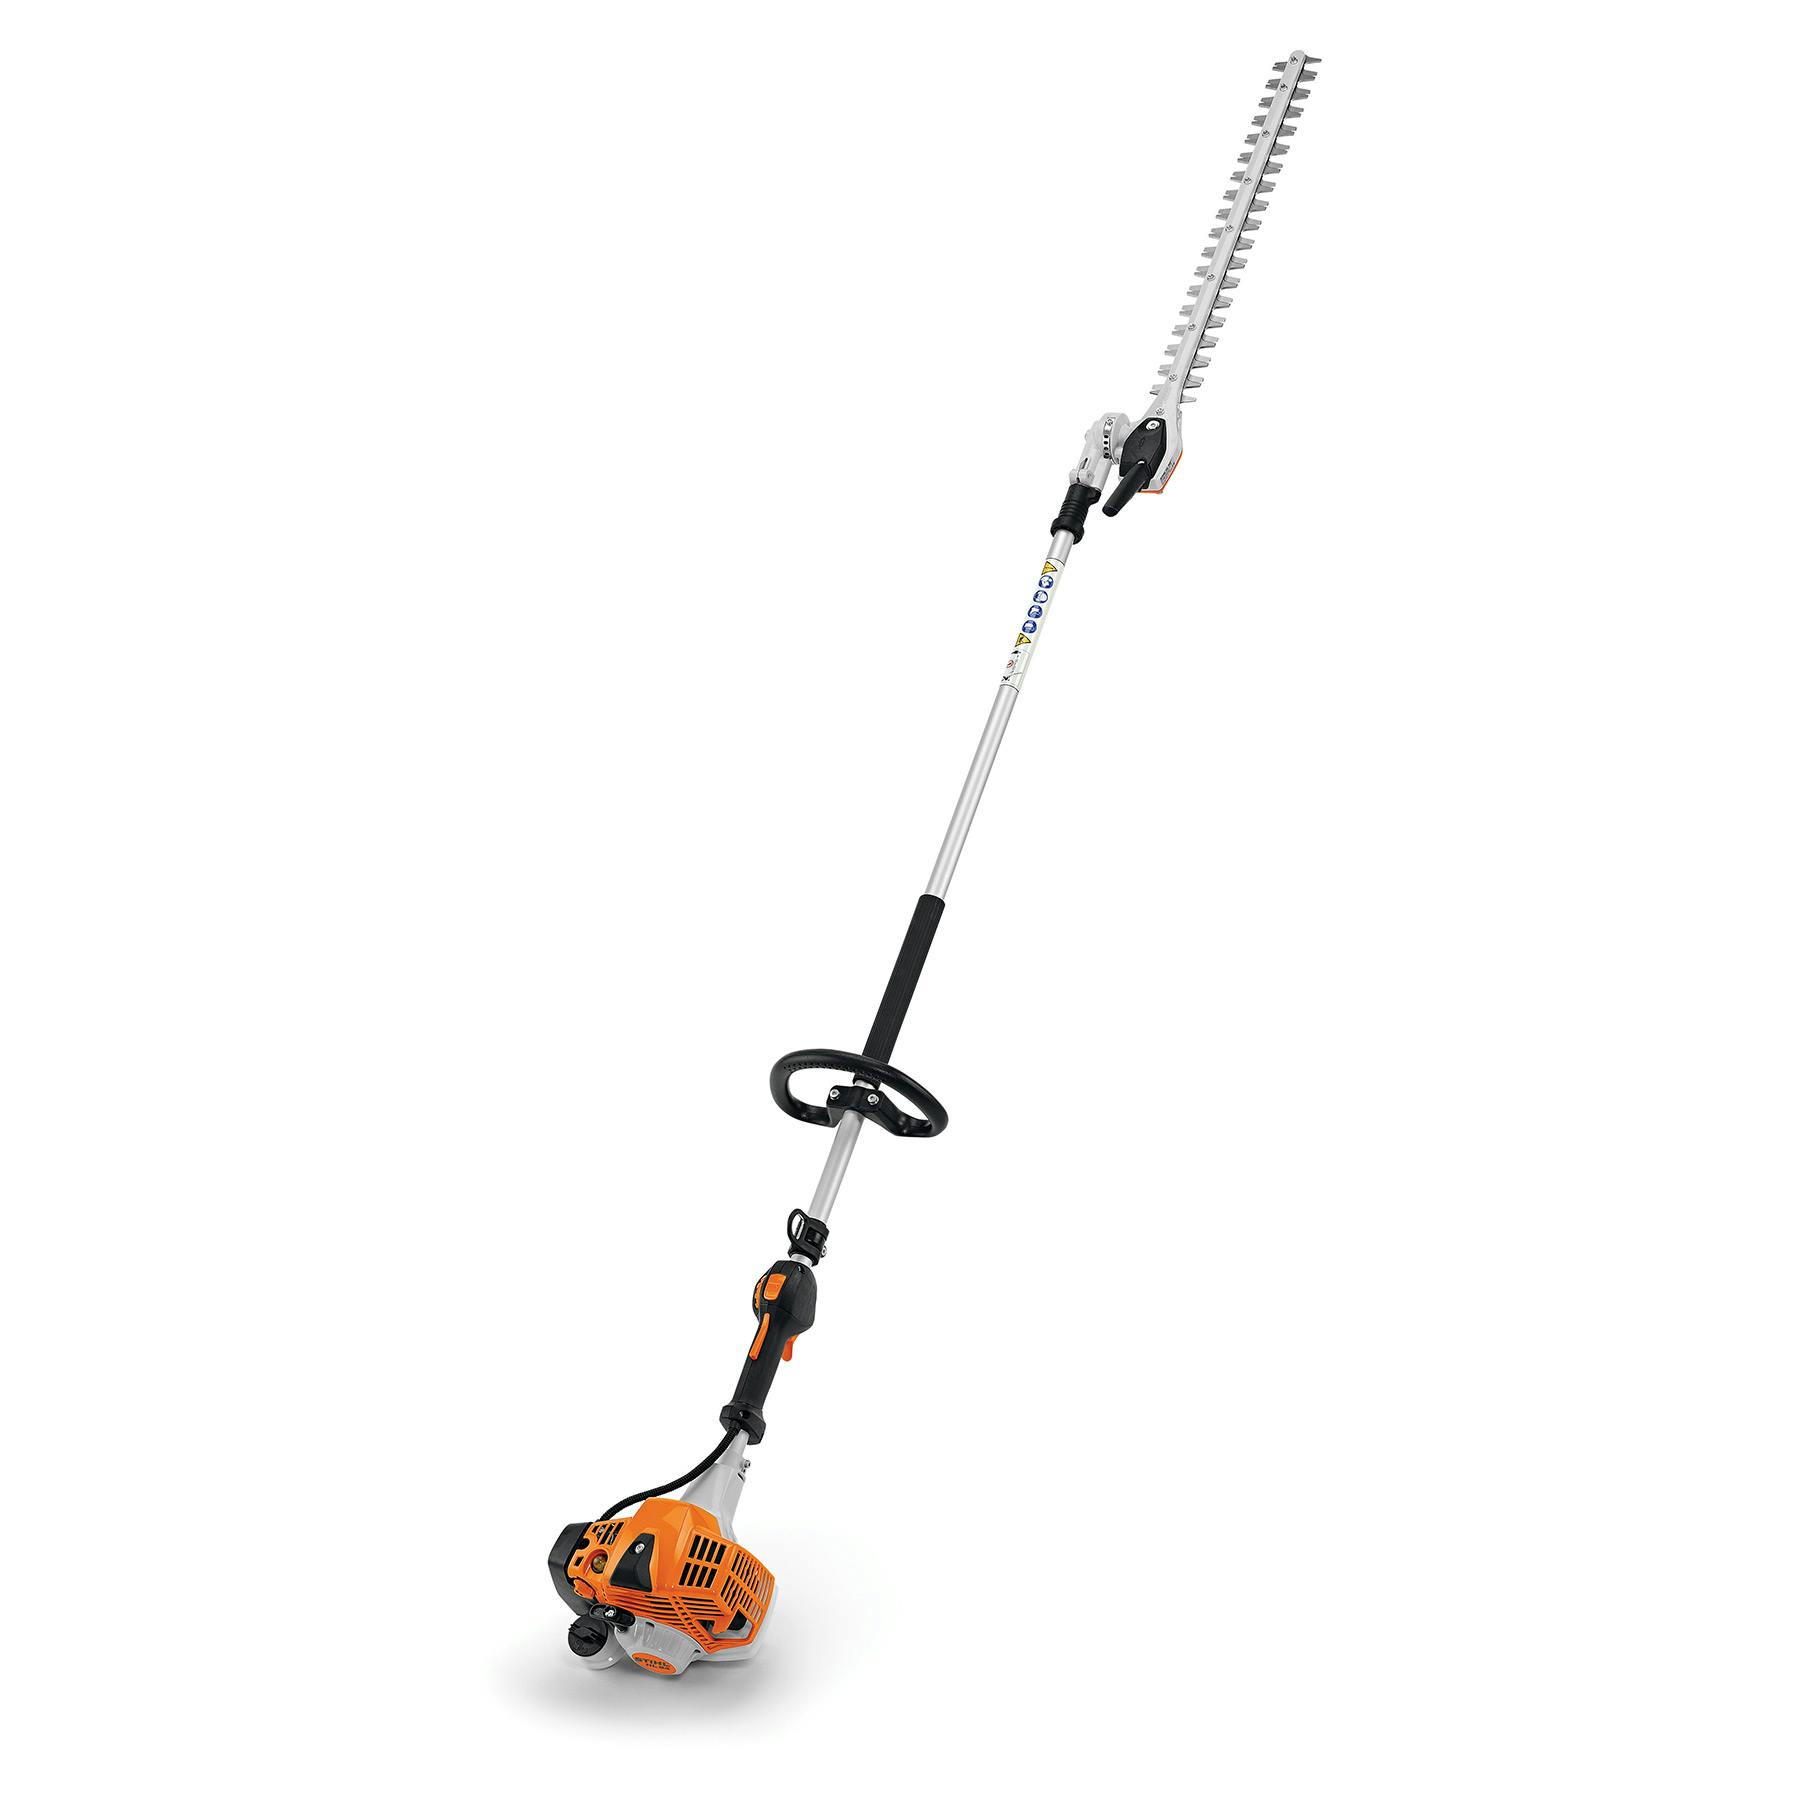 Stihl hedge trimmer blade double sided 600mm